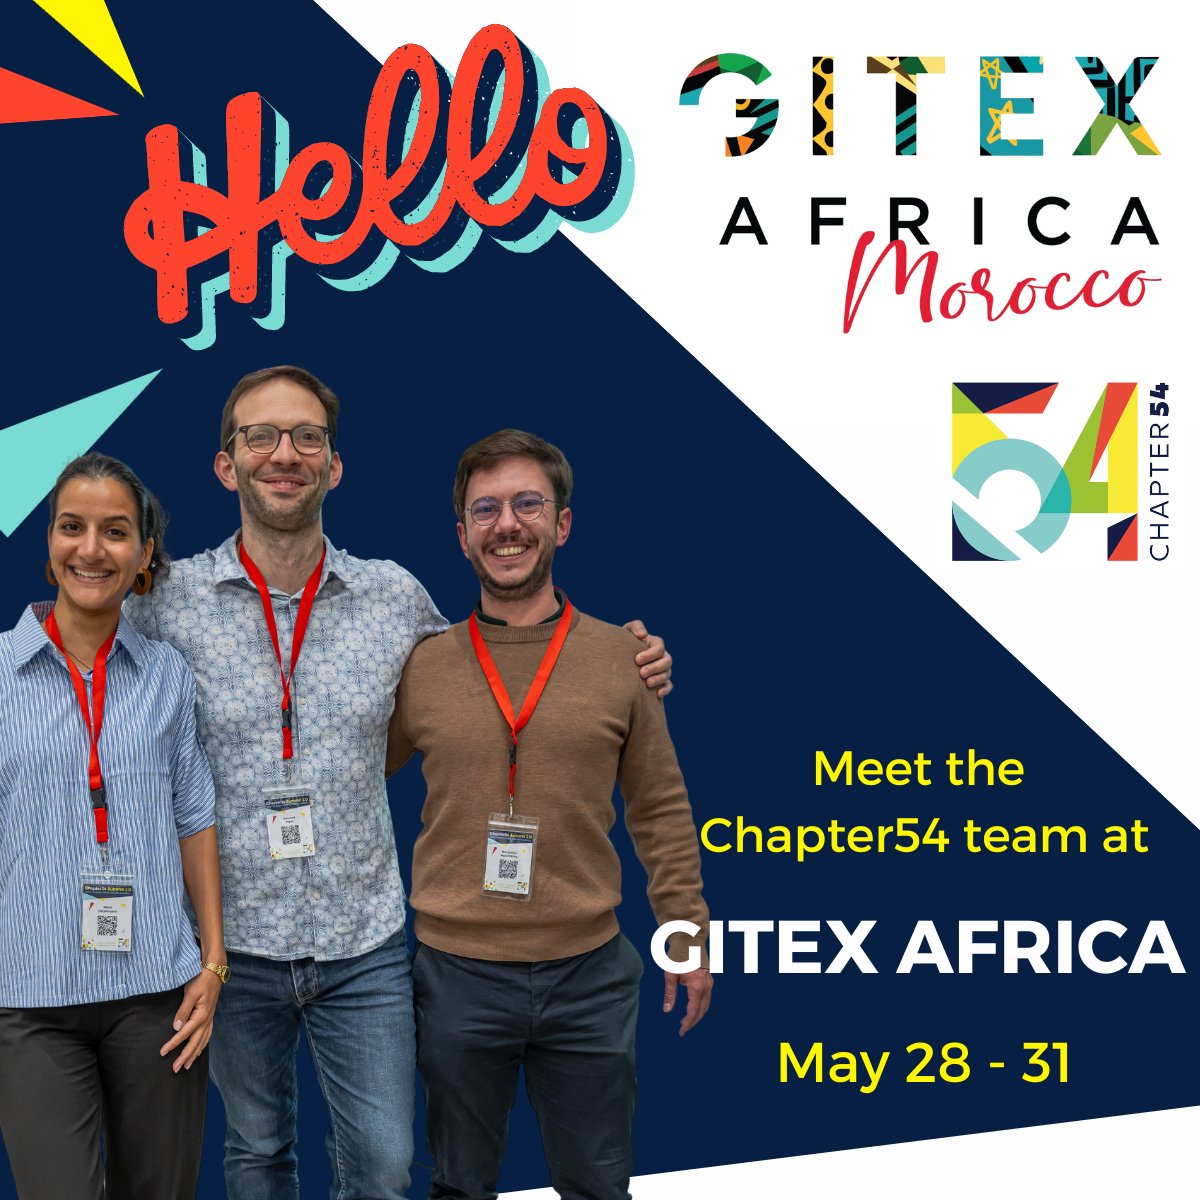 Get ready for round 2 at @GITEXAfrica with Team #Chapter54 🌍💼 After rocking it last year, they're back for more. ⚡️ Catch us in Marrakech on May 27-28! 📅 Our Scaleup Success Manager Mirja (Mimi), will be swinging by Casablanca on her way there. Don’t miss it!